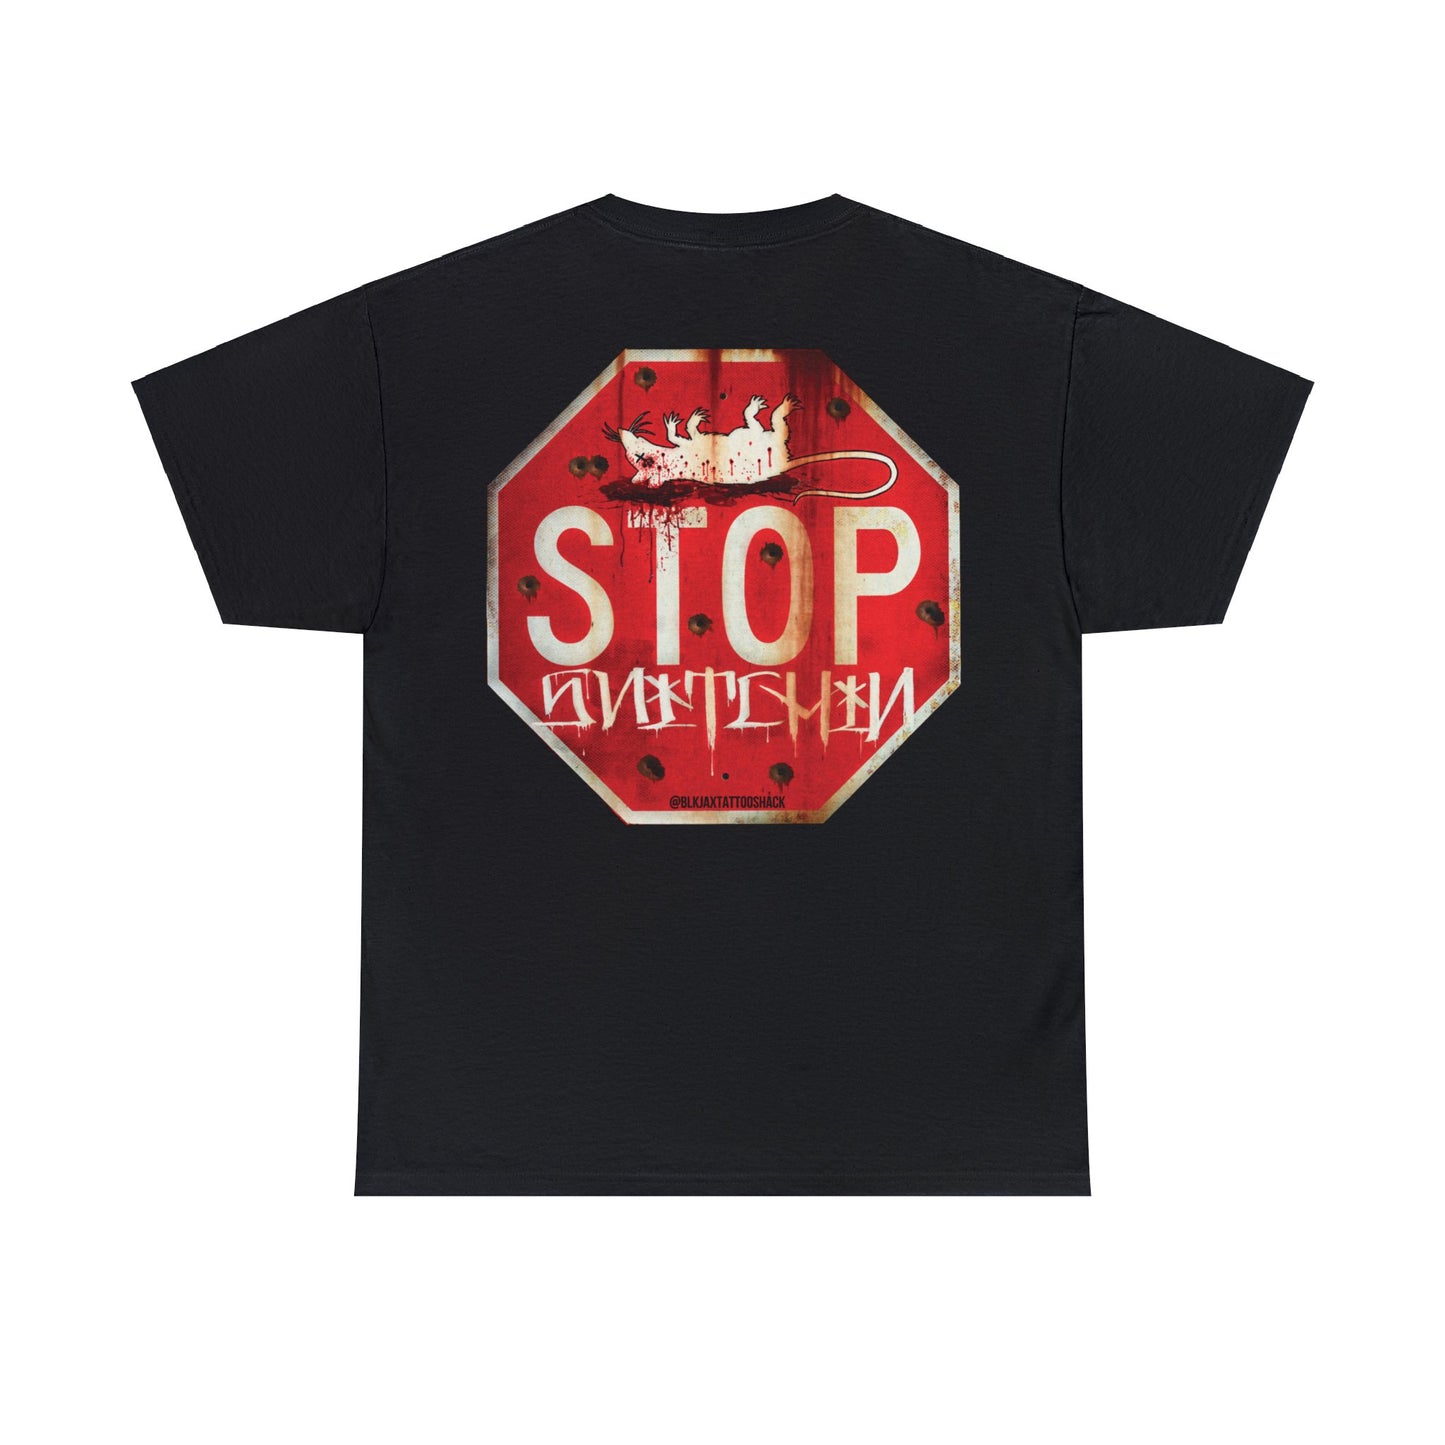 AJ's Stop Snitchin "Fink" Edition Tee